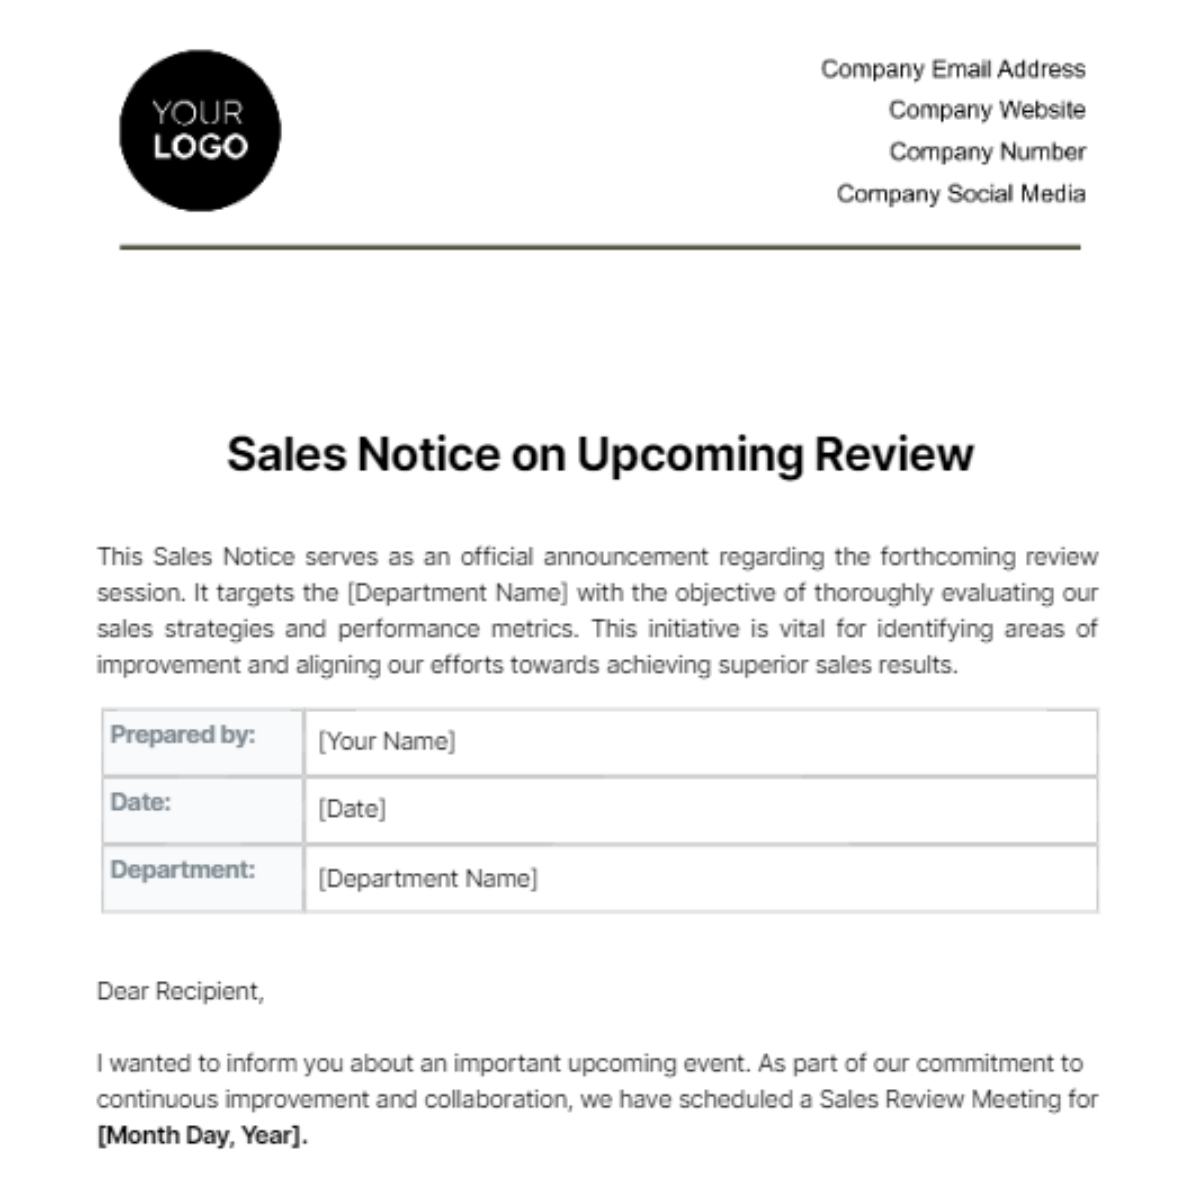 Sales Notice on Upcoming Review Template